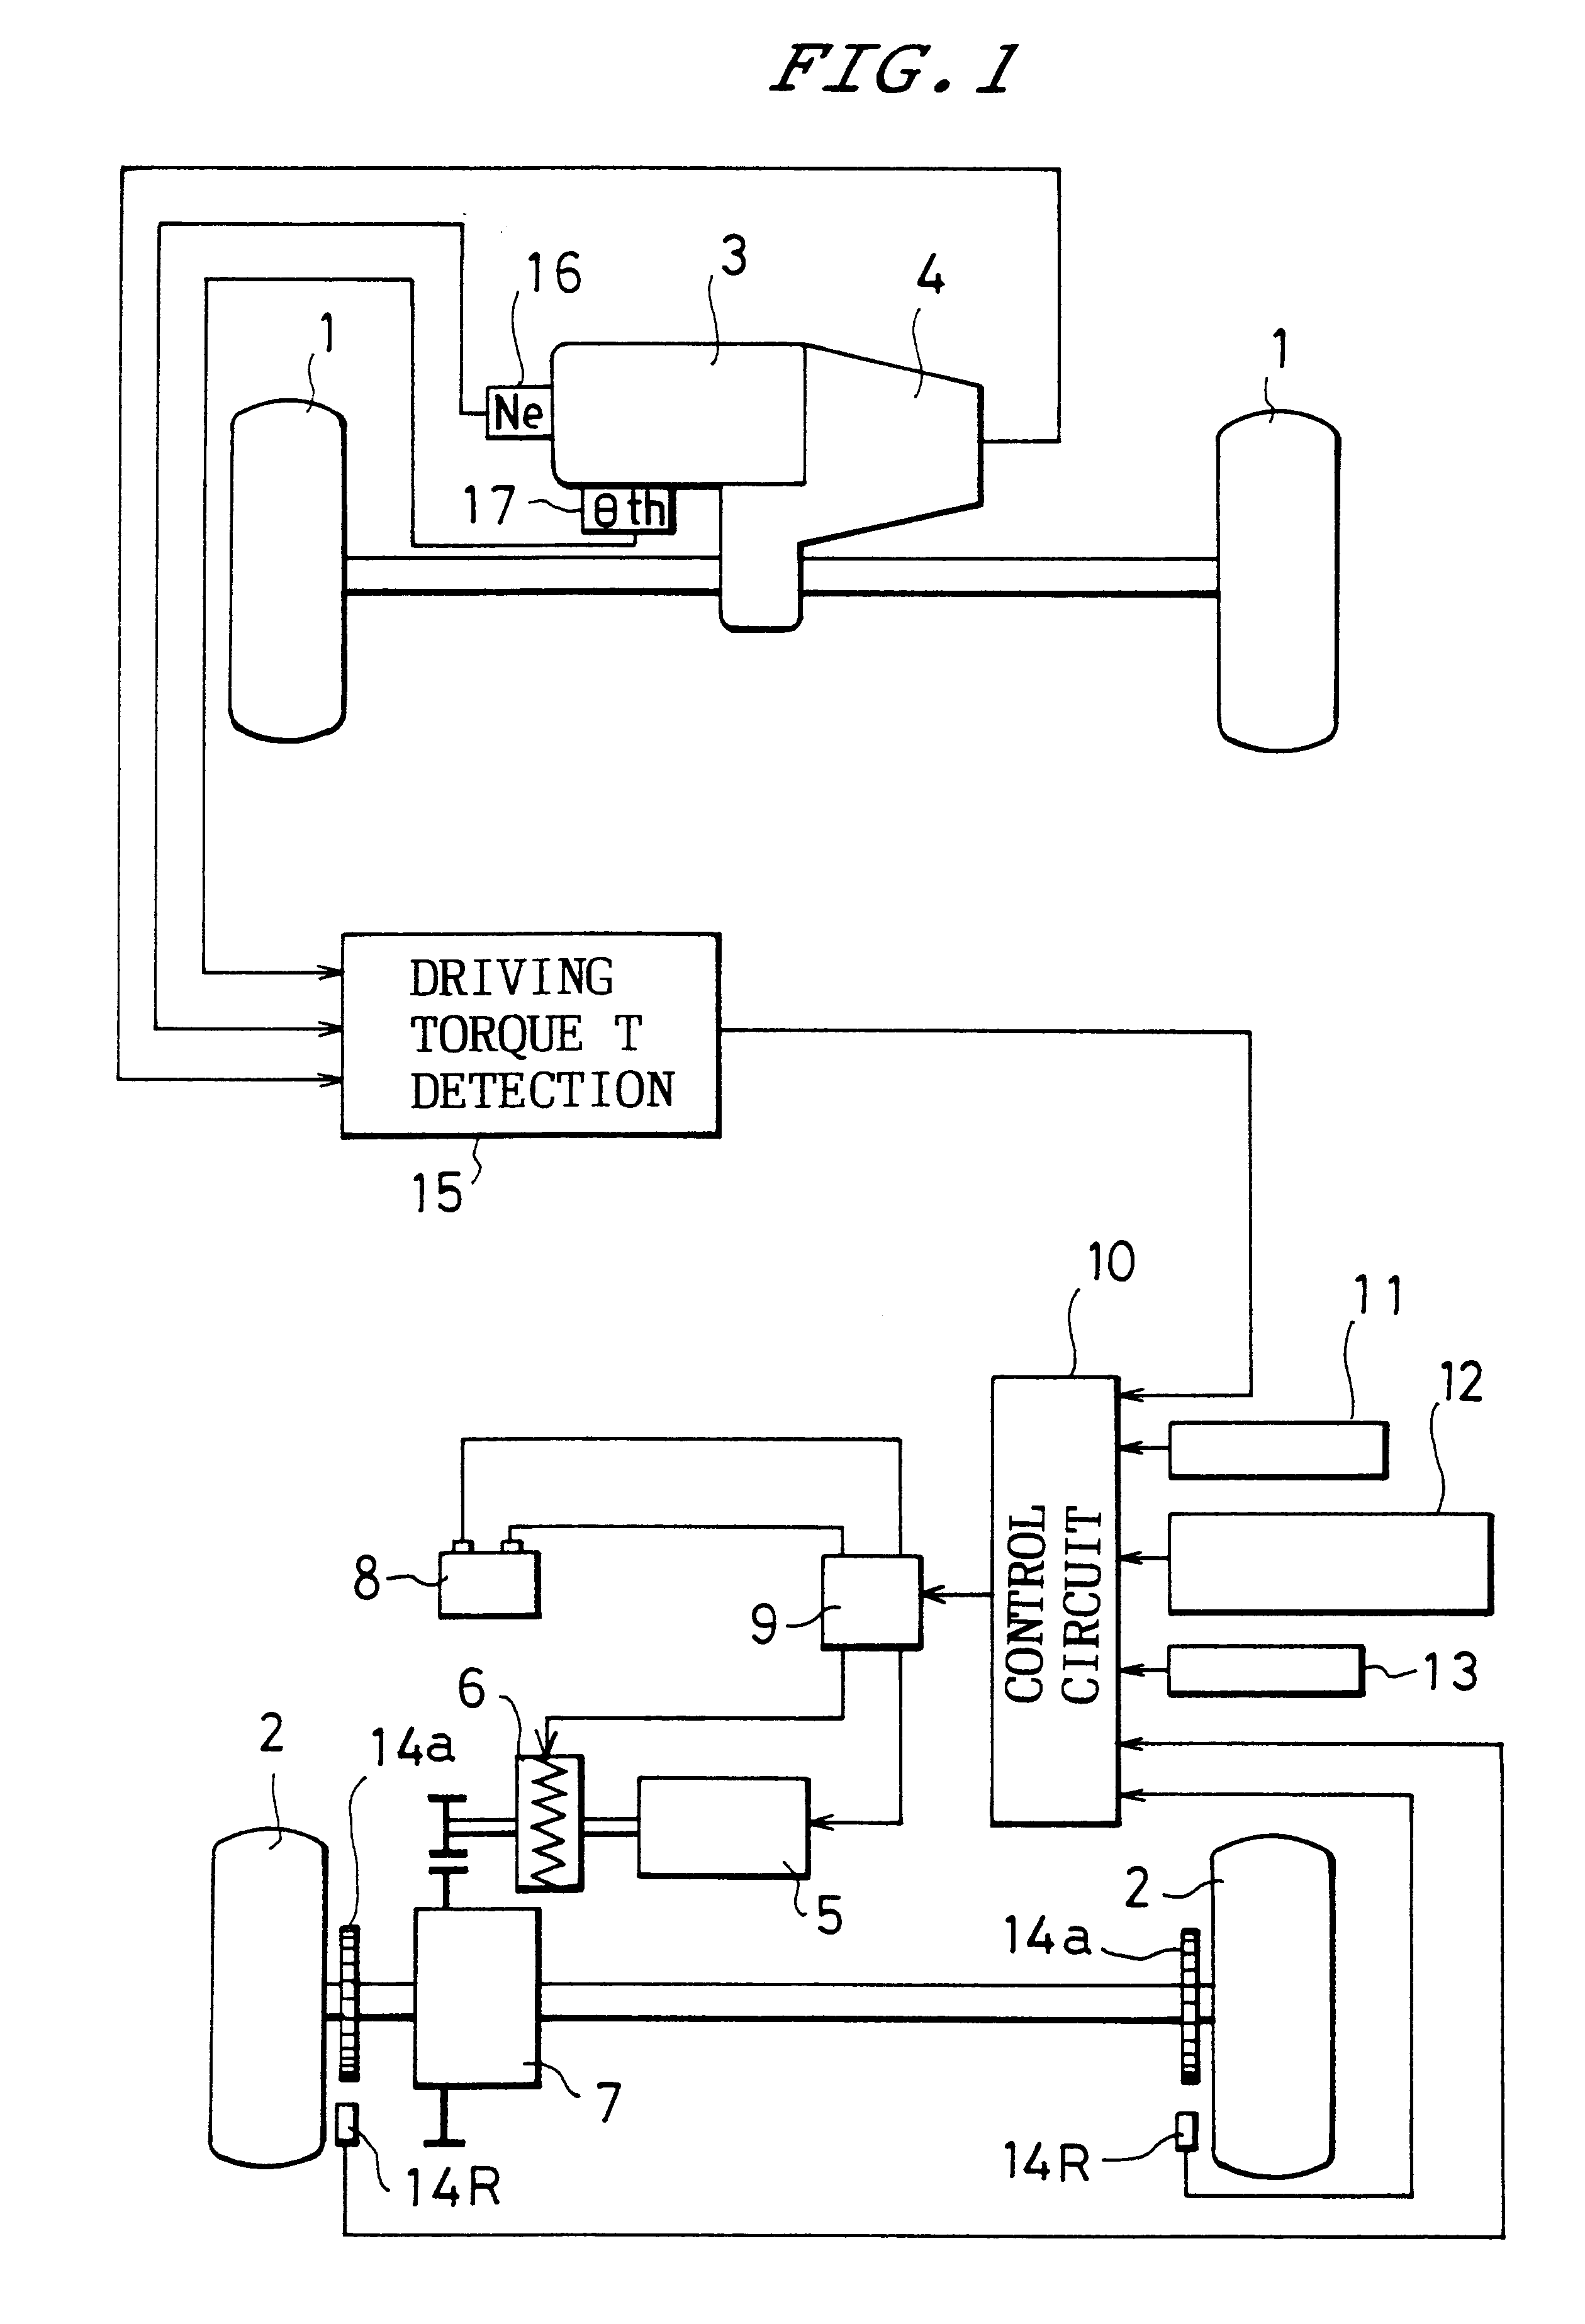 Torque detector and controls for prohibiting the operation of an electric motor on a hybrid vehicle when the driving torque of the vehicle exceeds a predetermined value during start-up